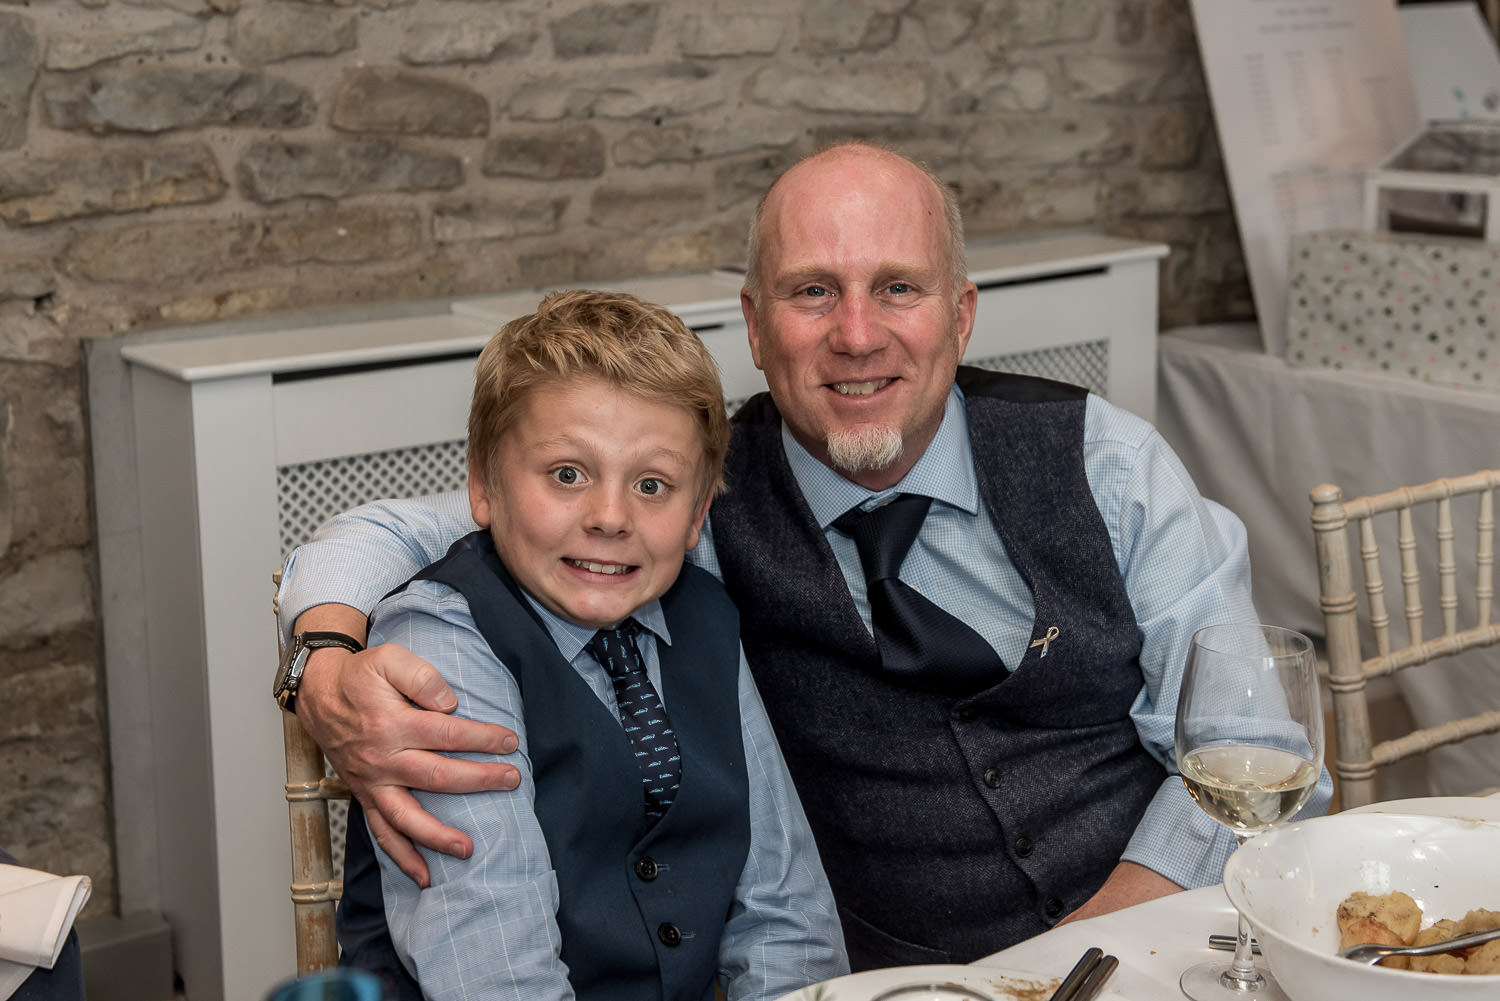 wedding guest with his son